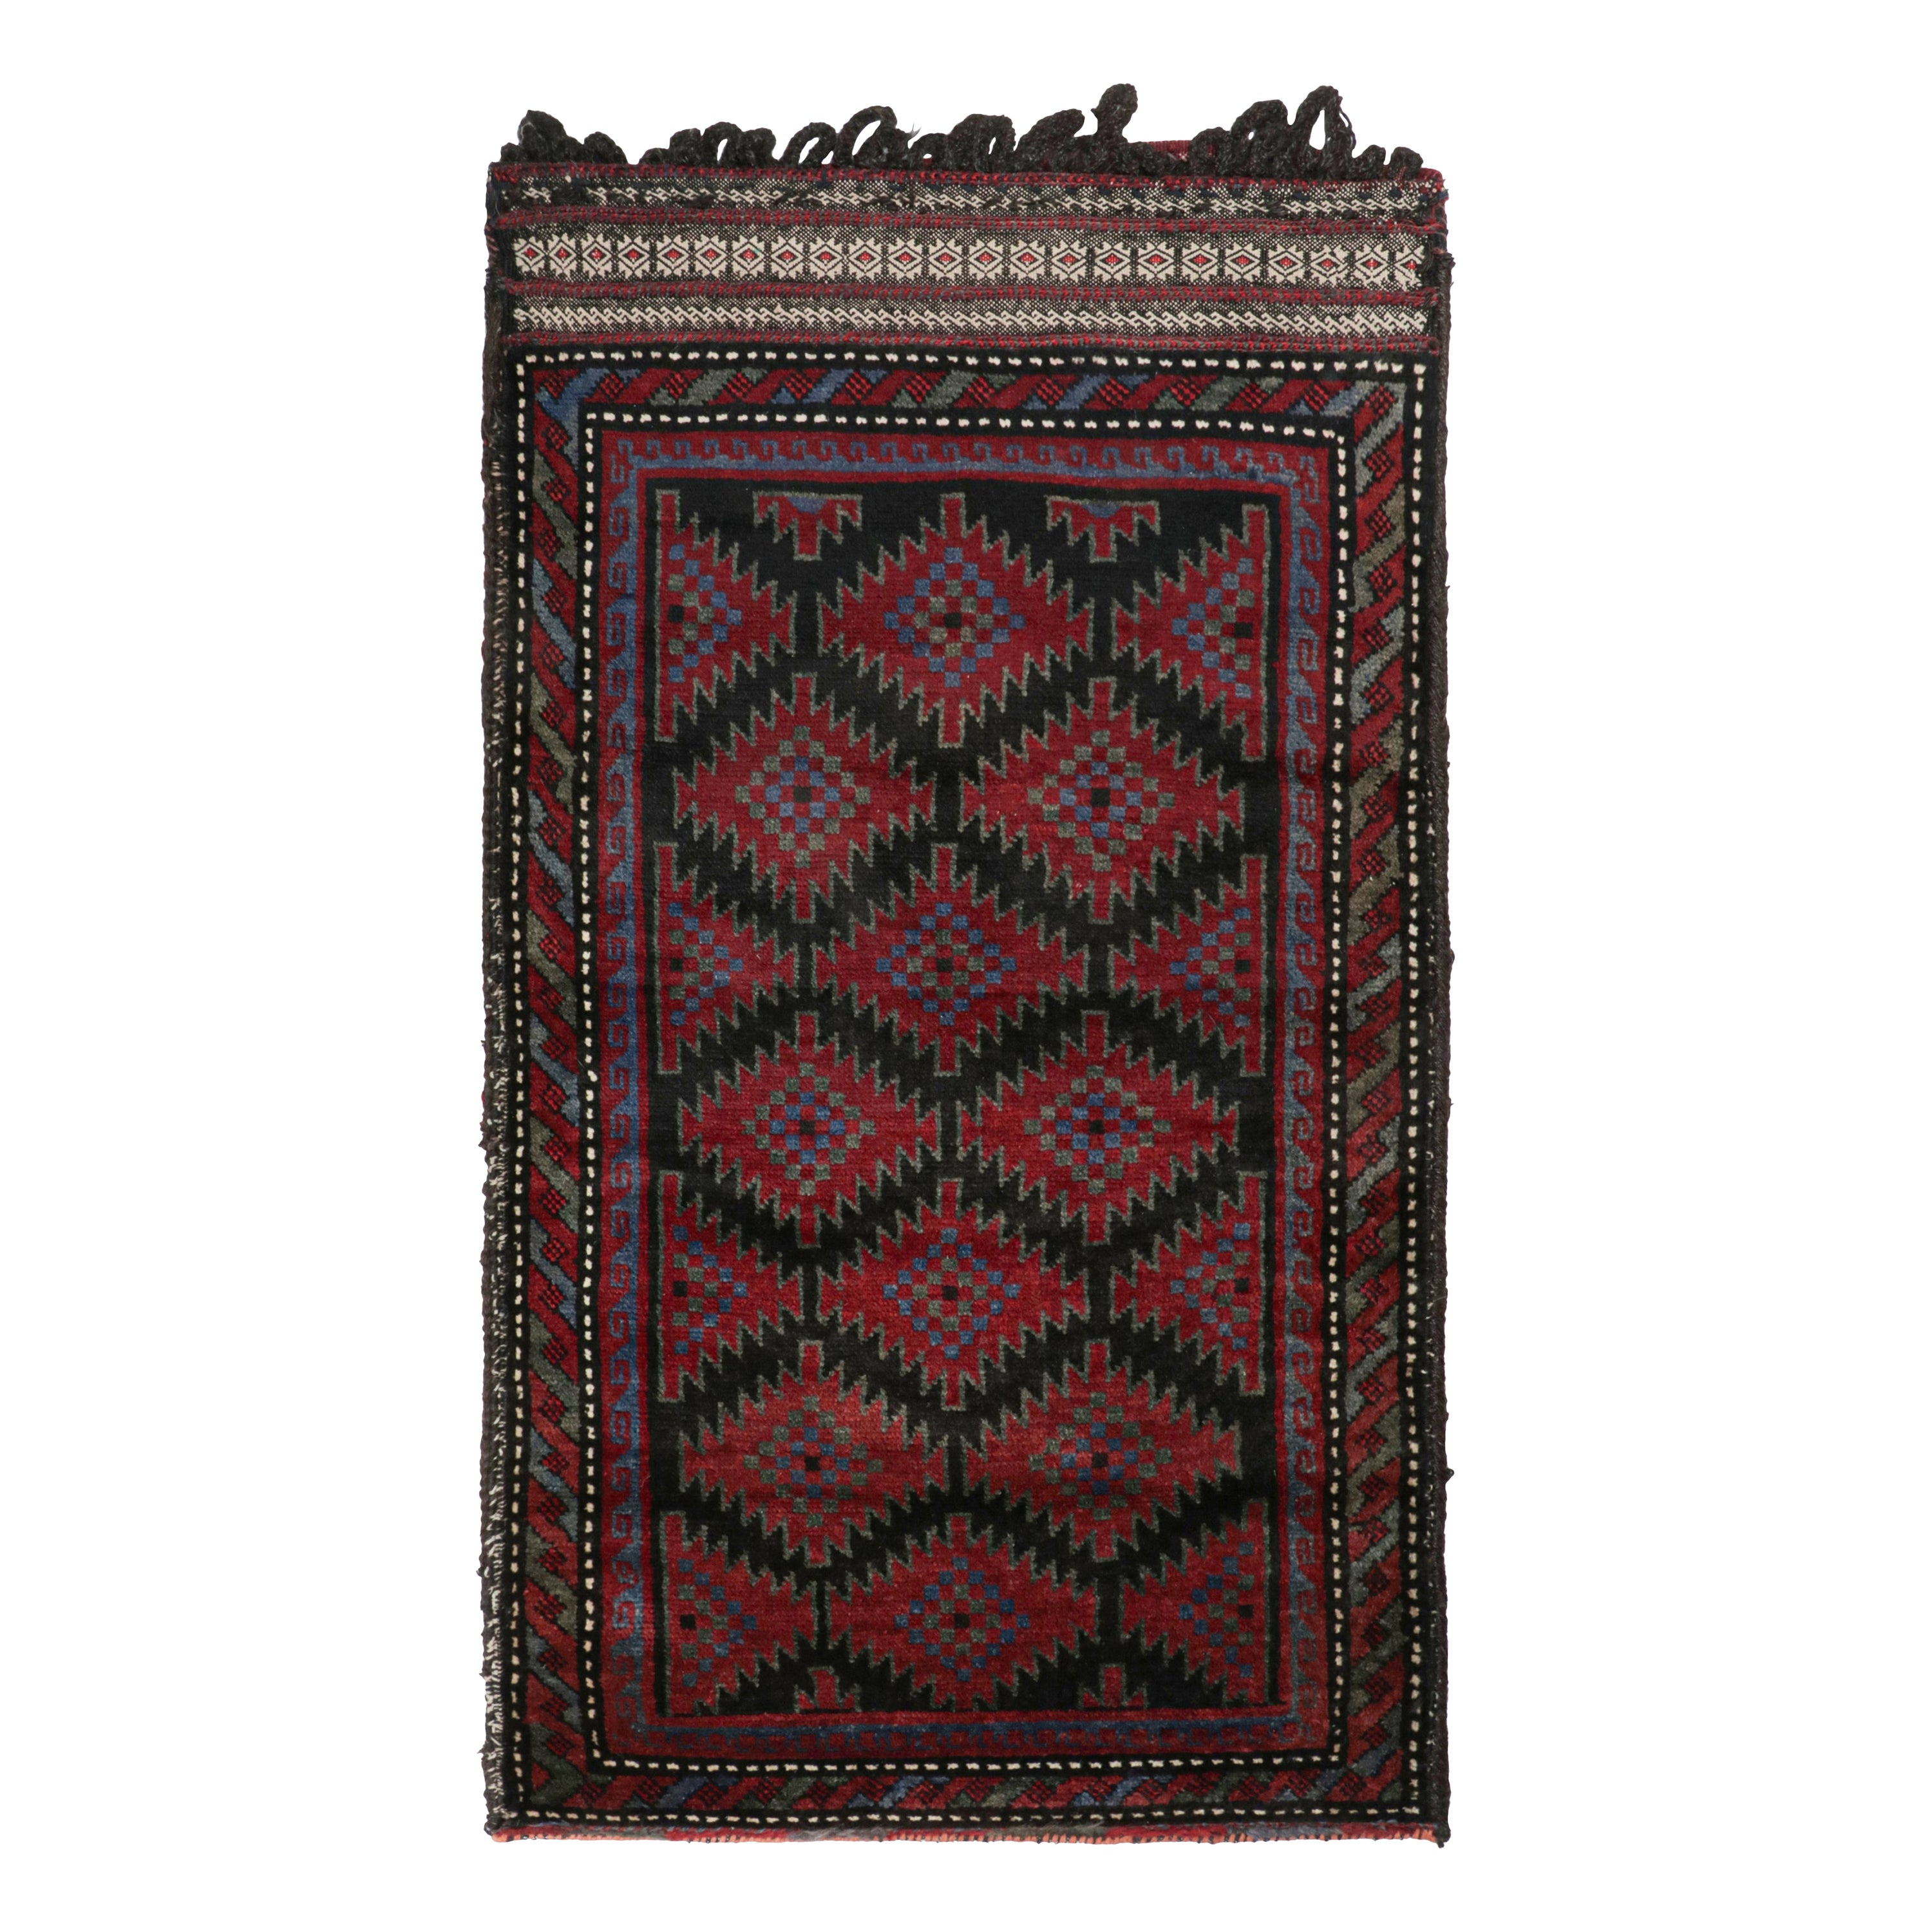 Vintage Baluch Persian rug in Black & Red Tribal Patterns from Rug & Kilim